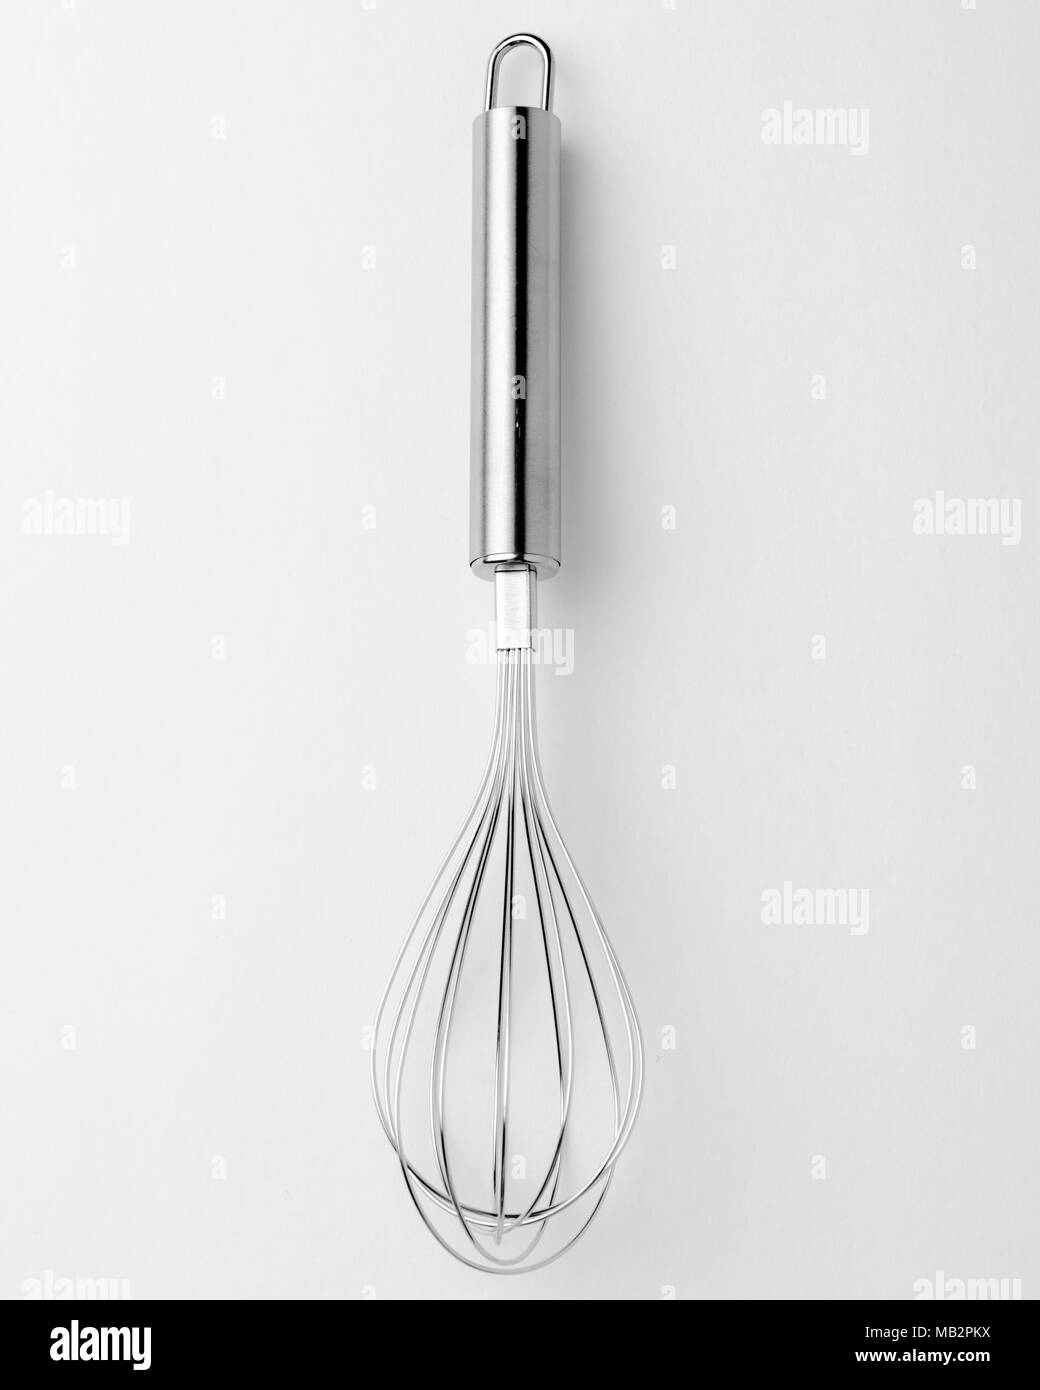 https://c8.alamy.com/comp/MB2PKX/kitchen-utensil-whisk-beater-utensils-used-in-kitchen-to-make-food-and-projects-MB2PKX.jpg